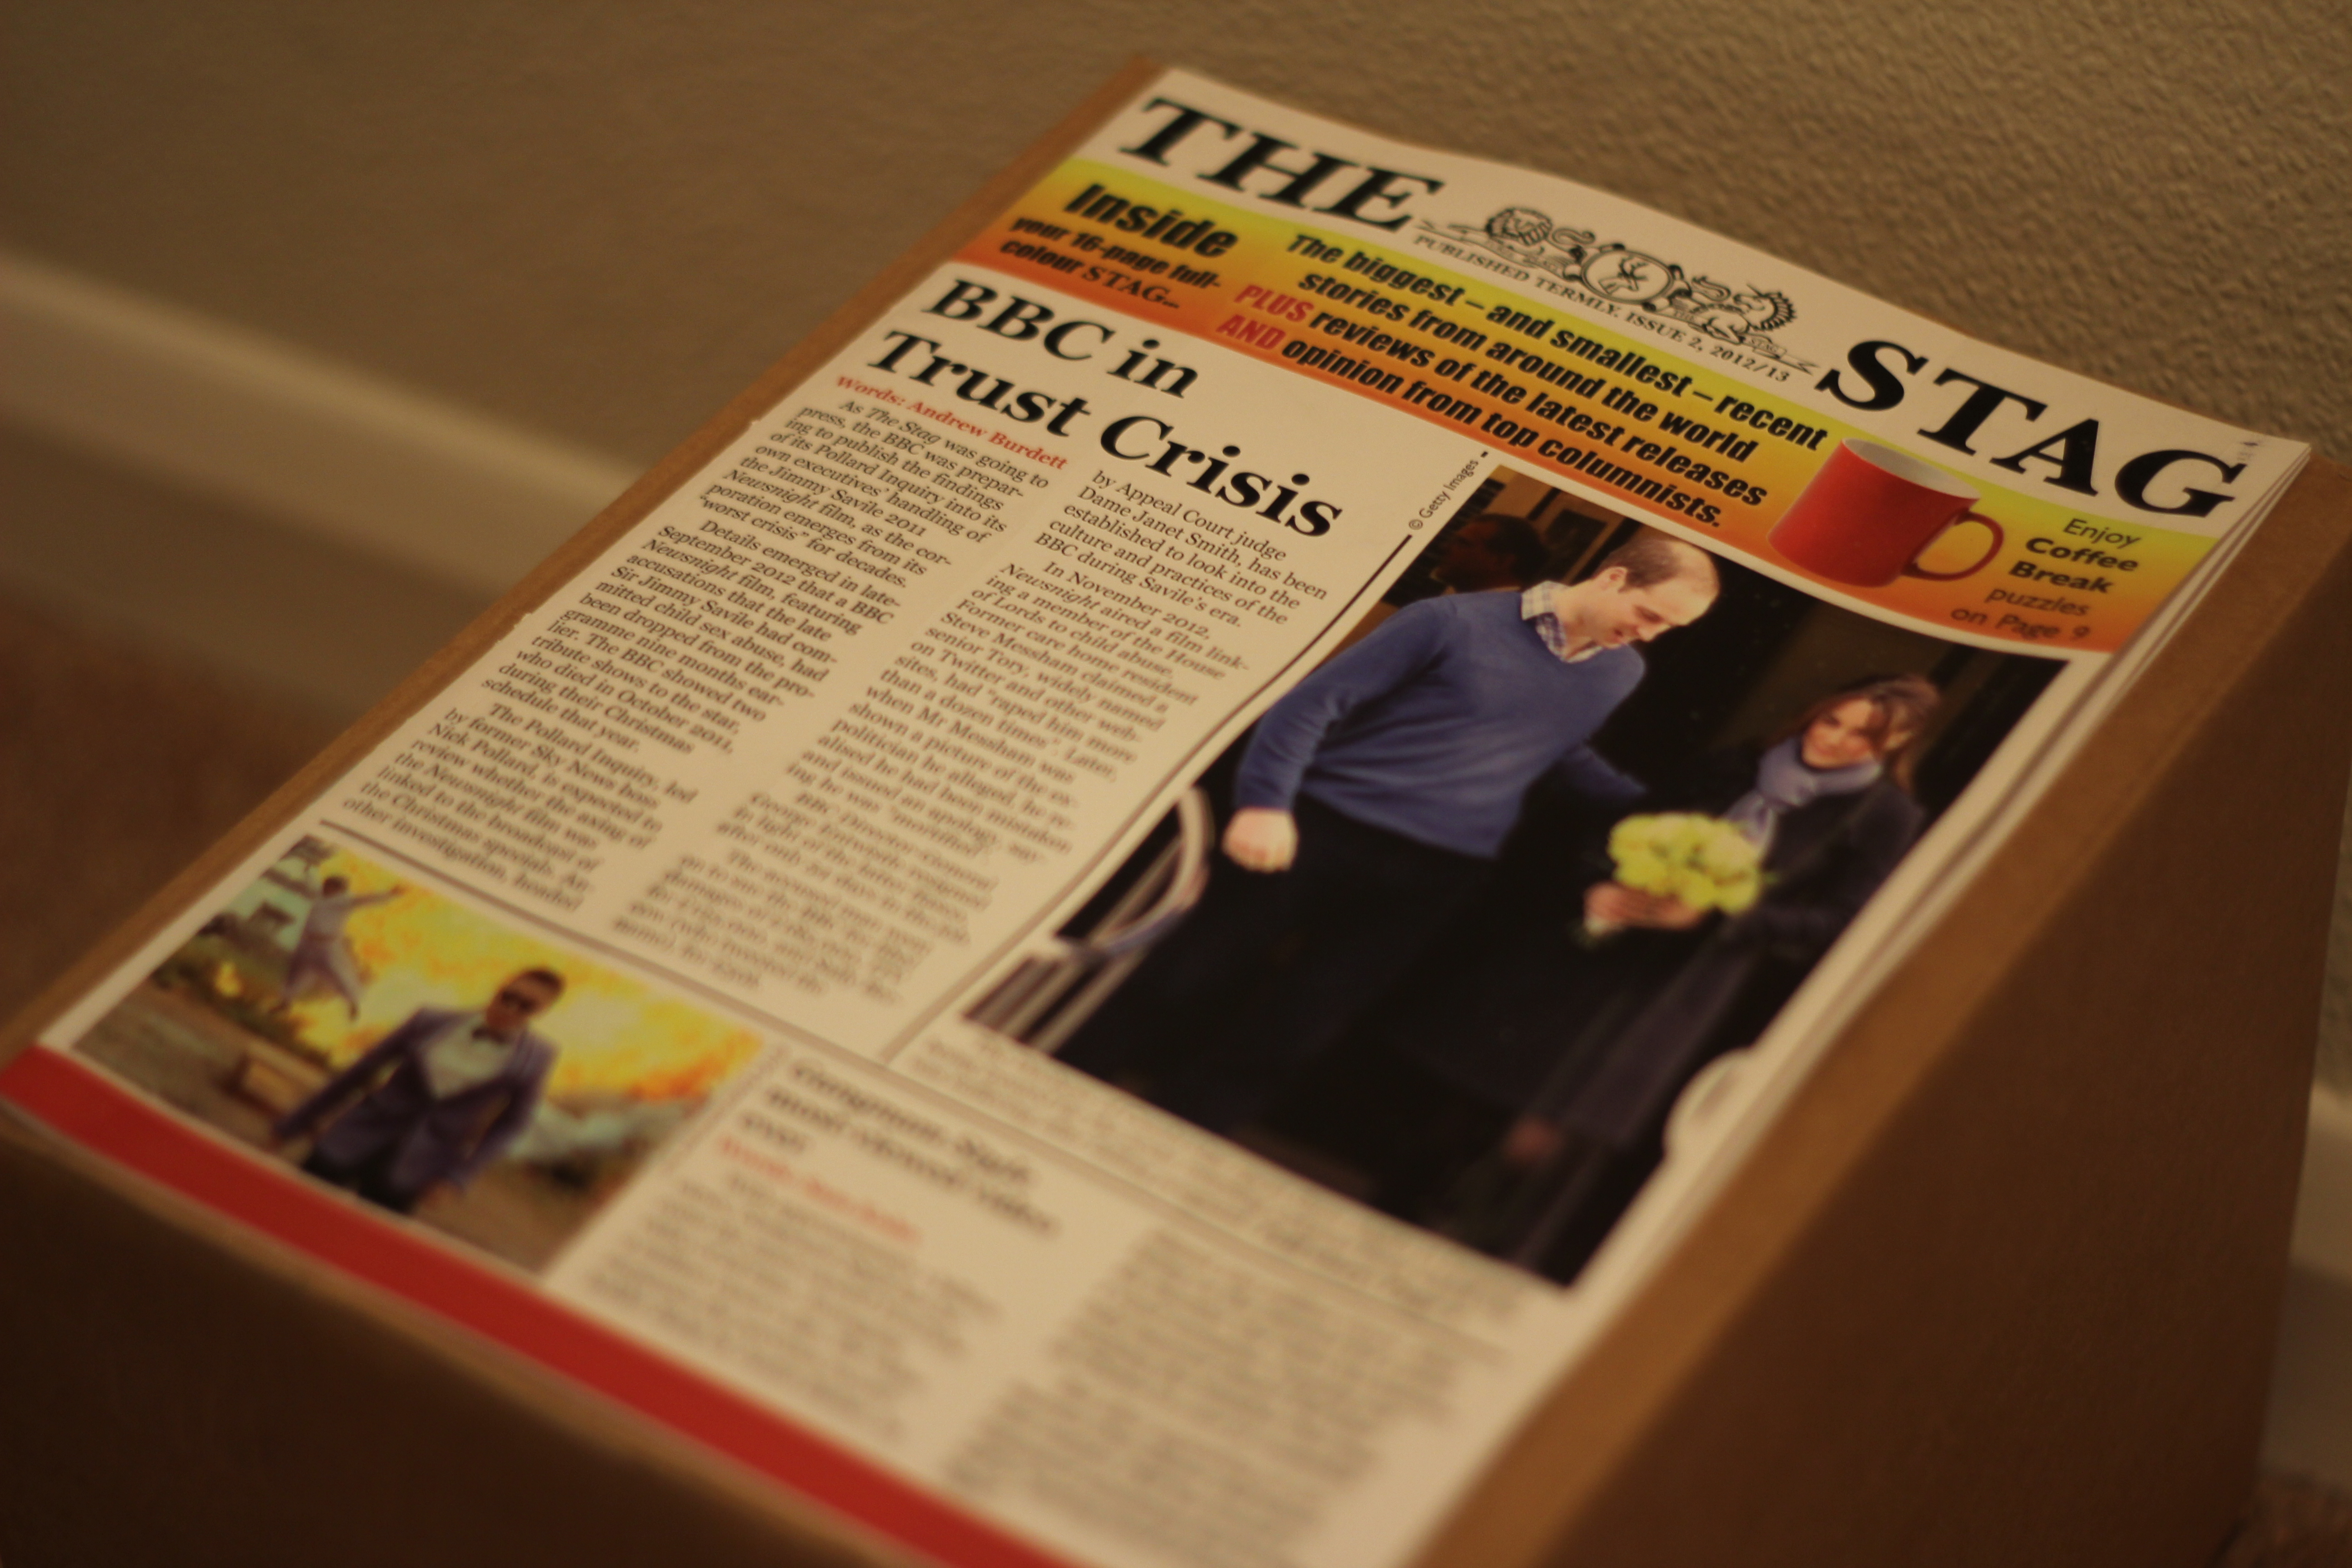 A box of copies of 'The Stag' magazine.